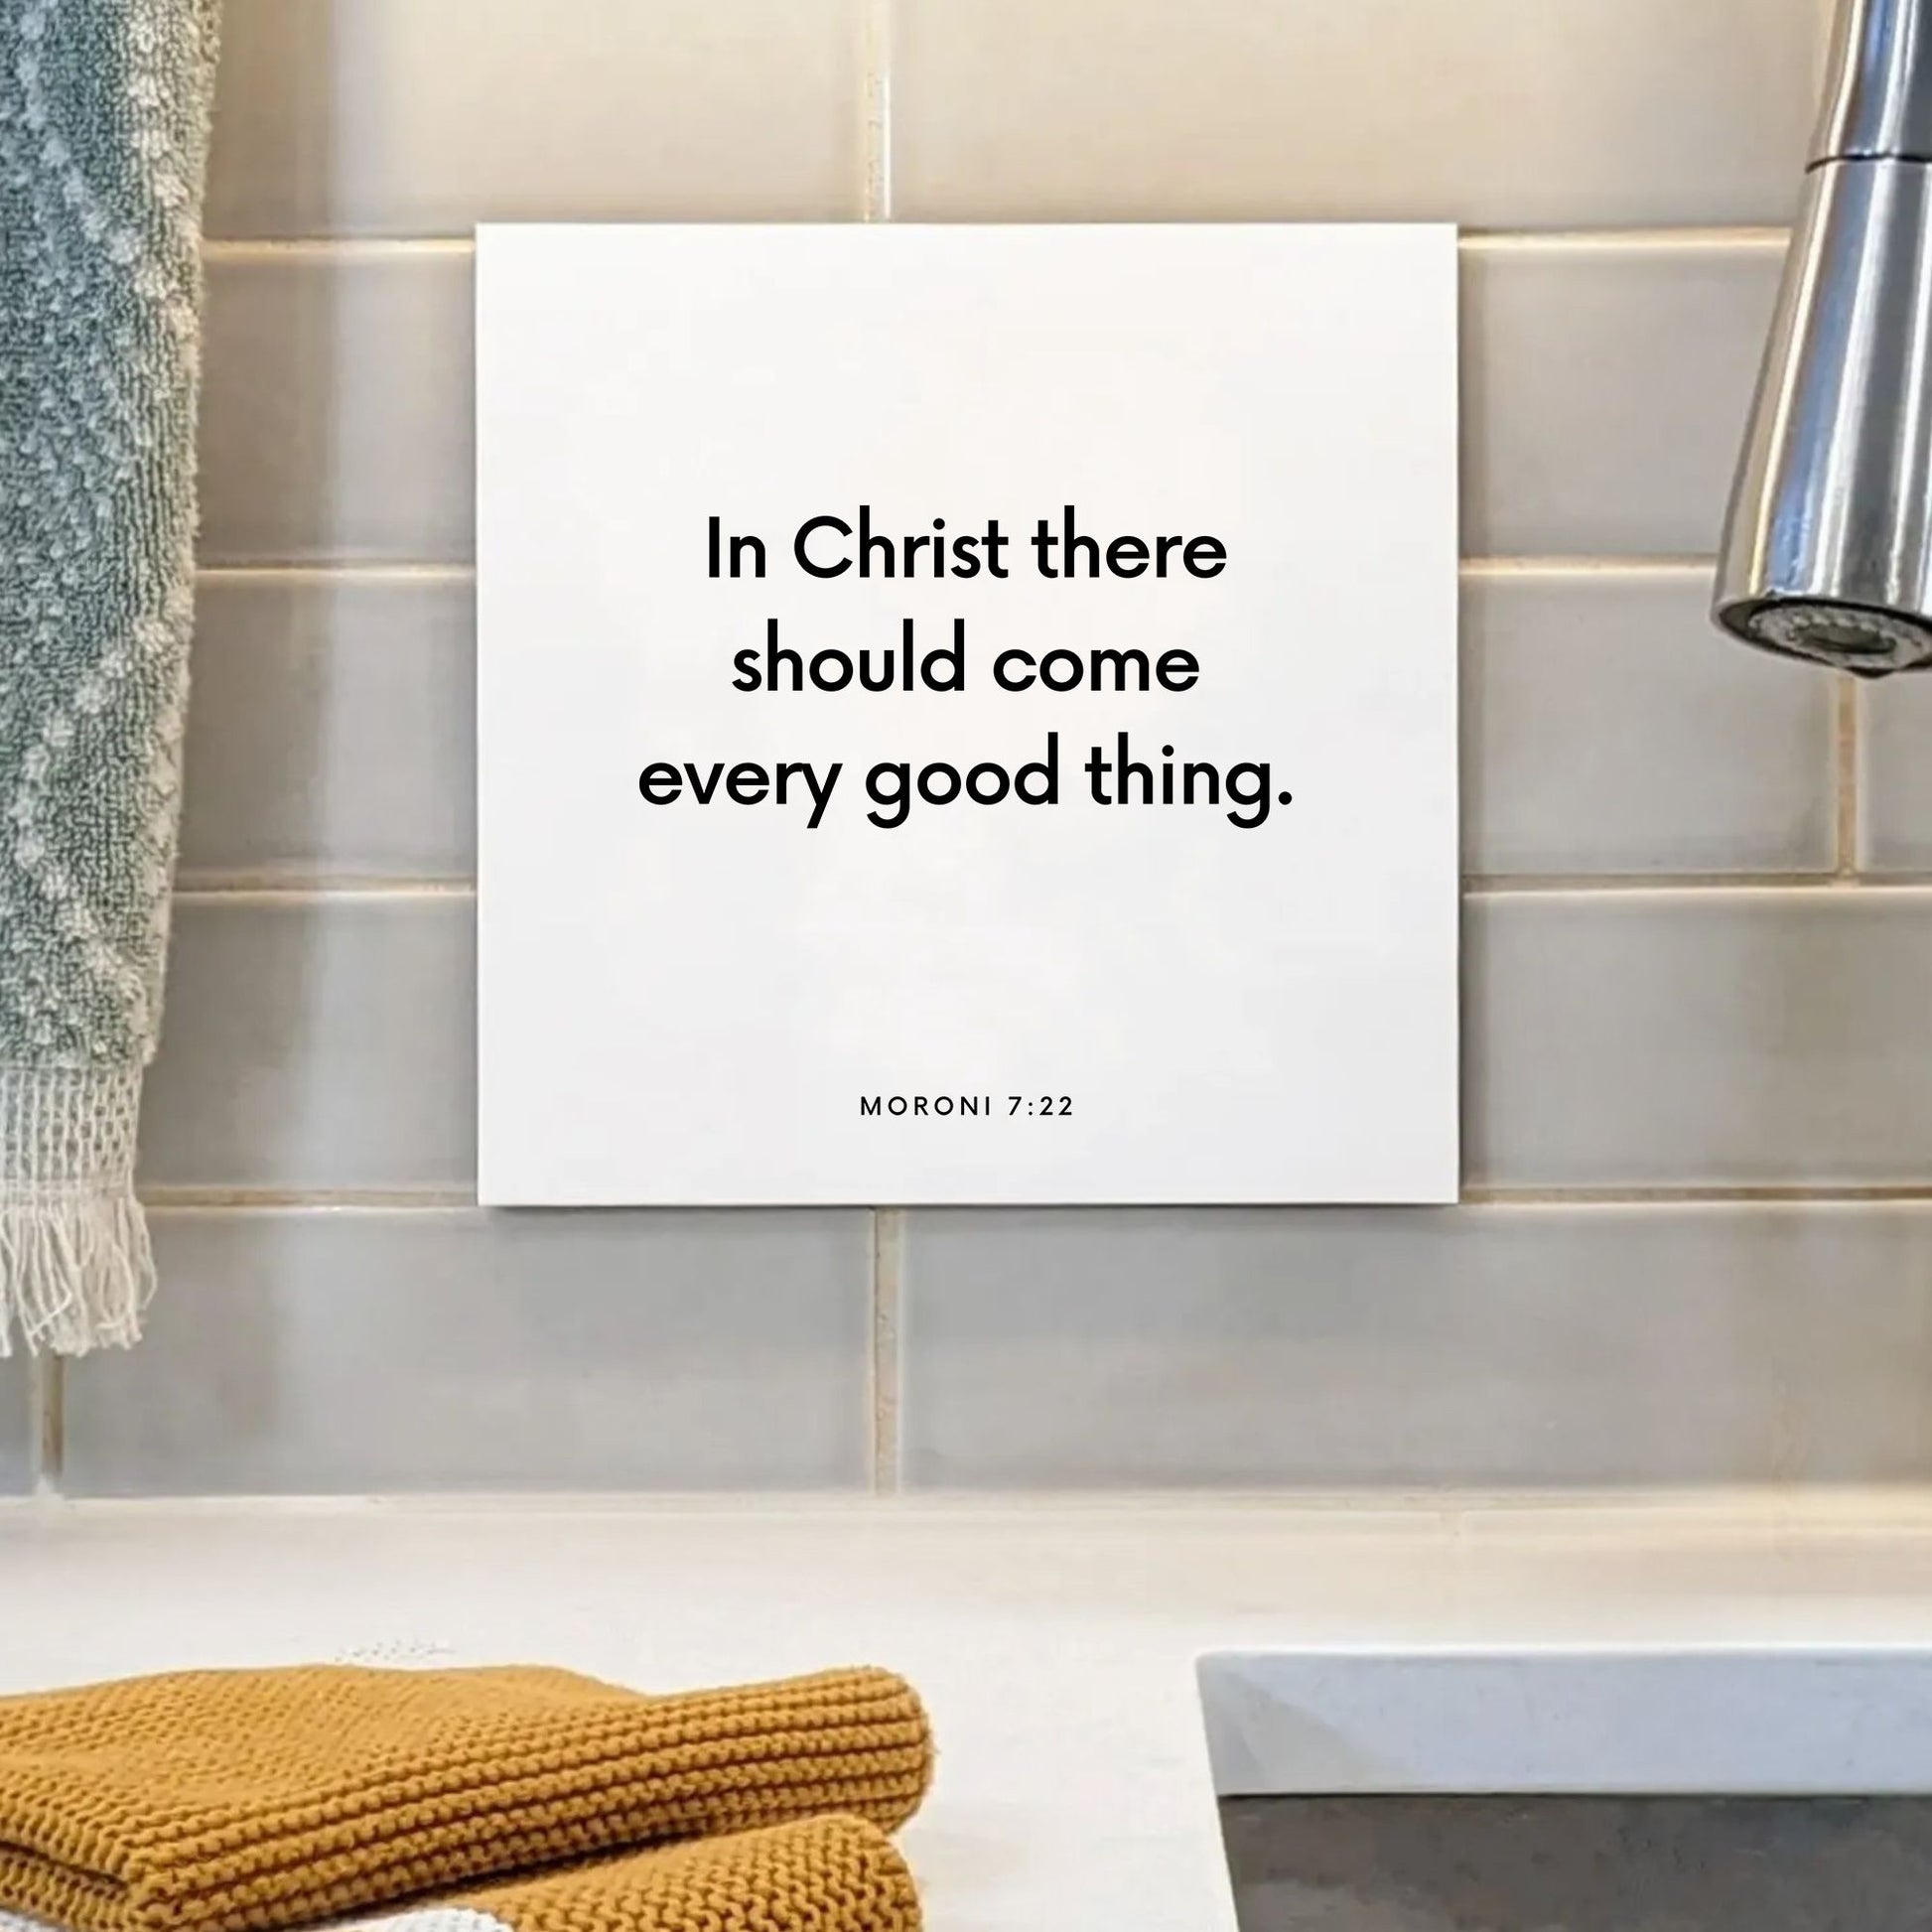 Sink mouting of the scripture tile for Moroni 7:22 - "In Christ there should come every good thing"